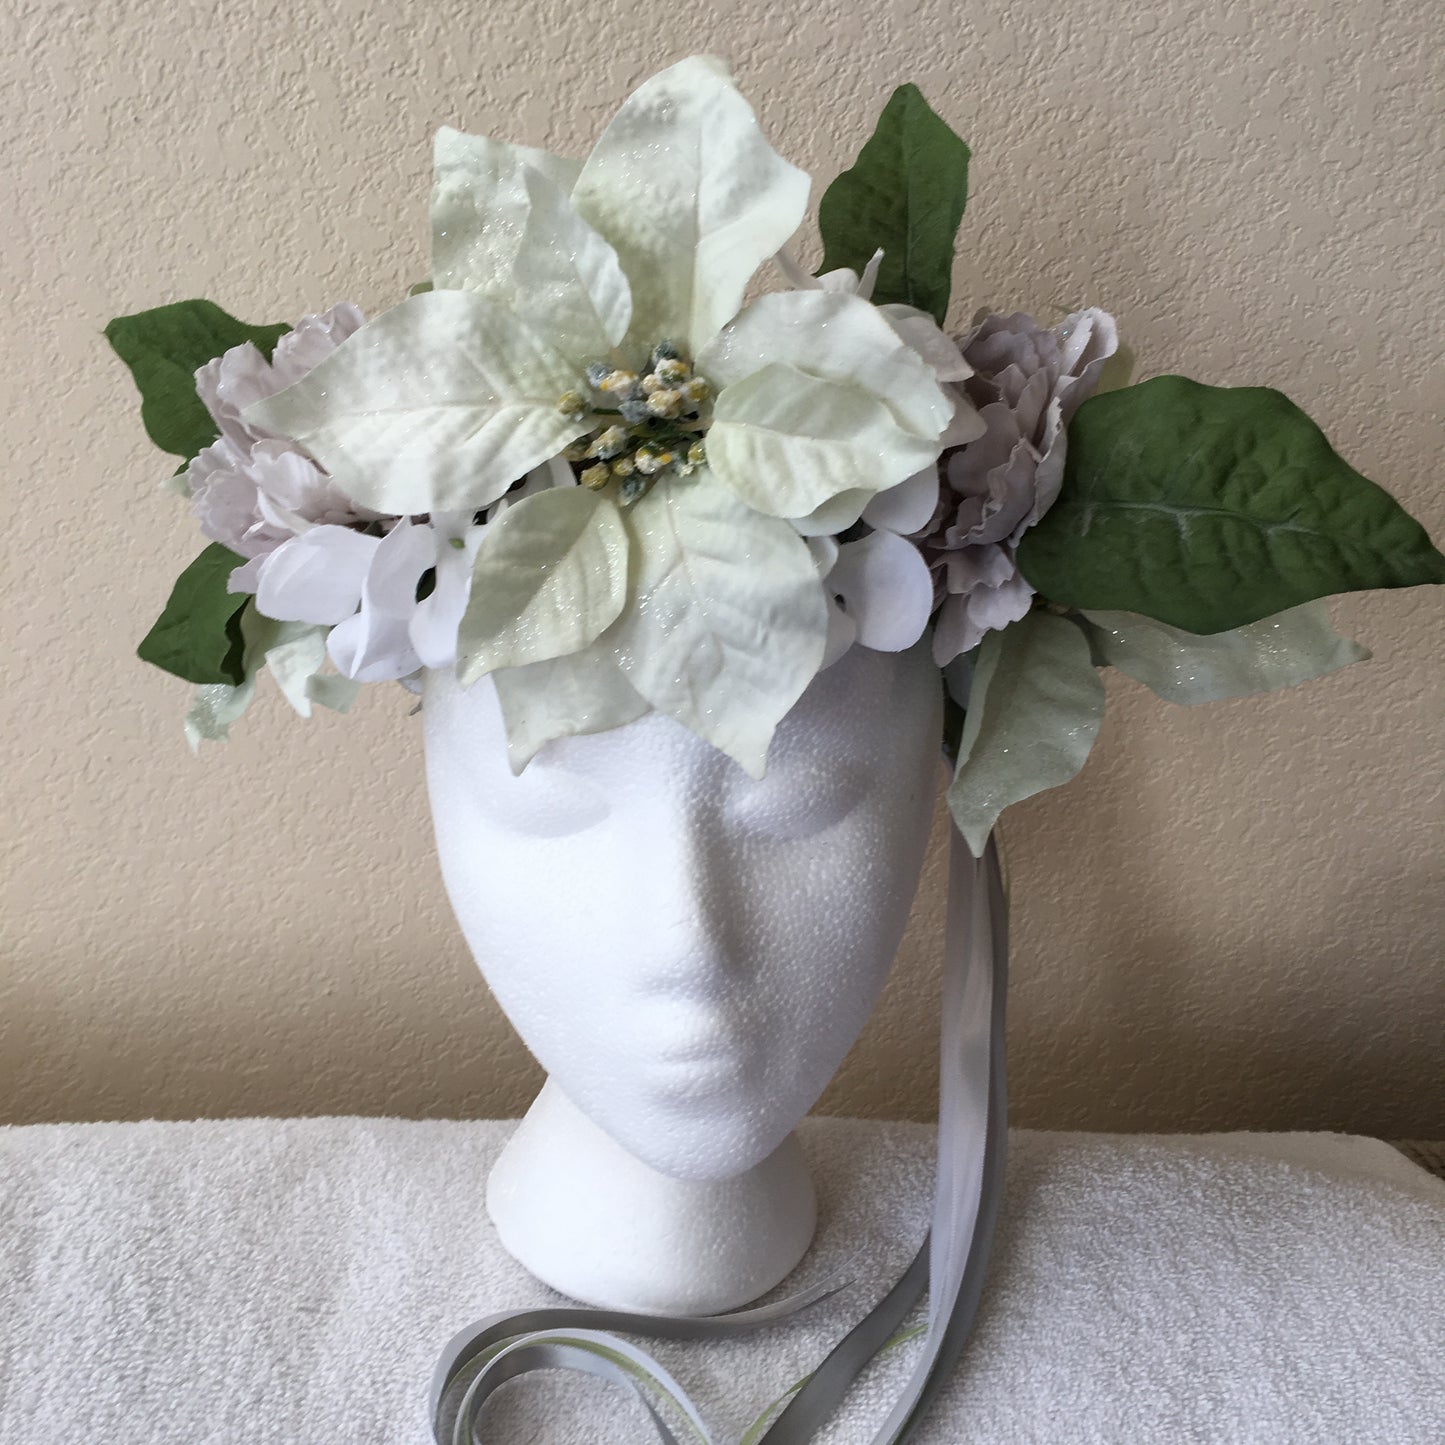 Extra Large Wreath - Pale green poinsettia & grey flowers